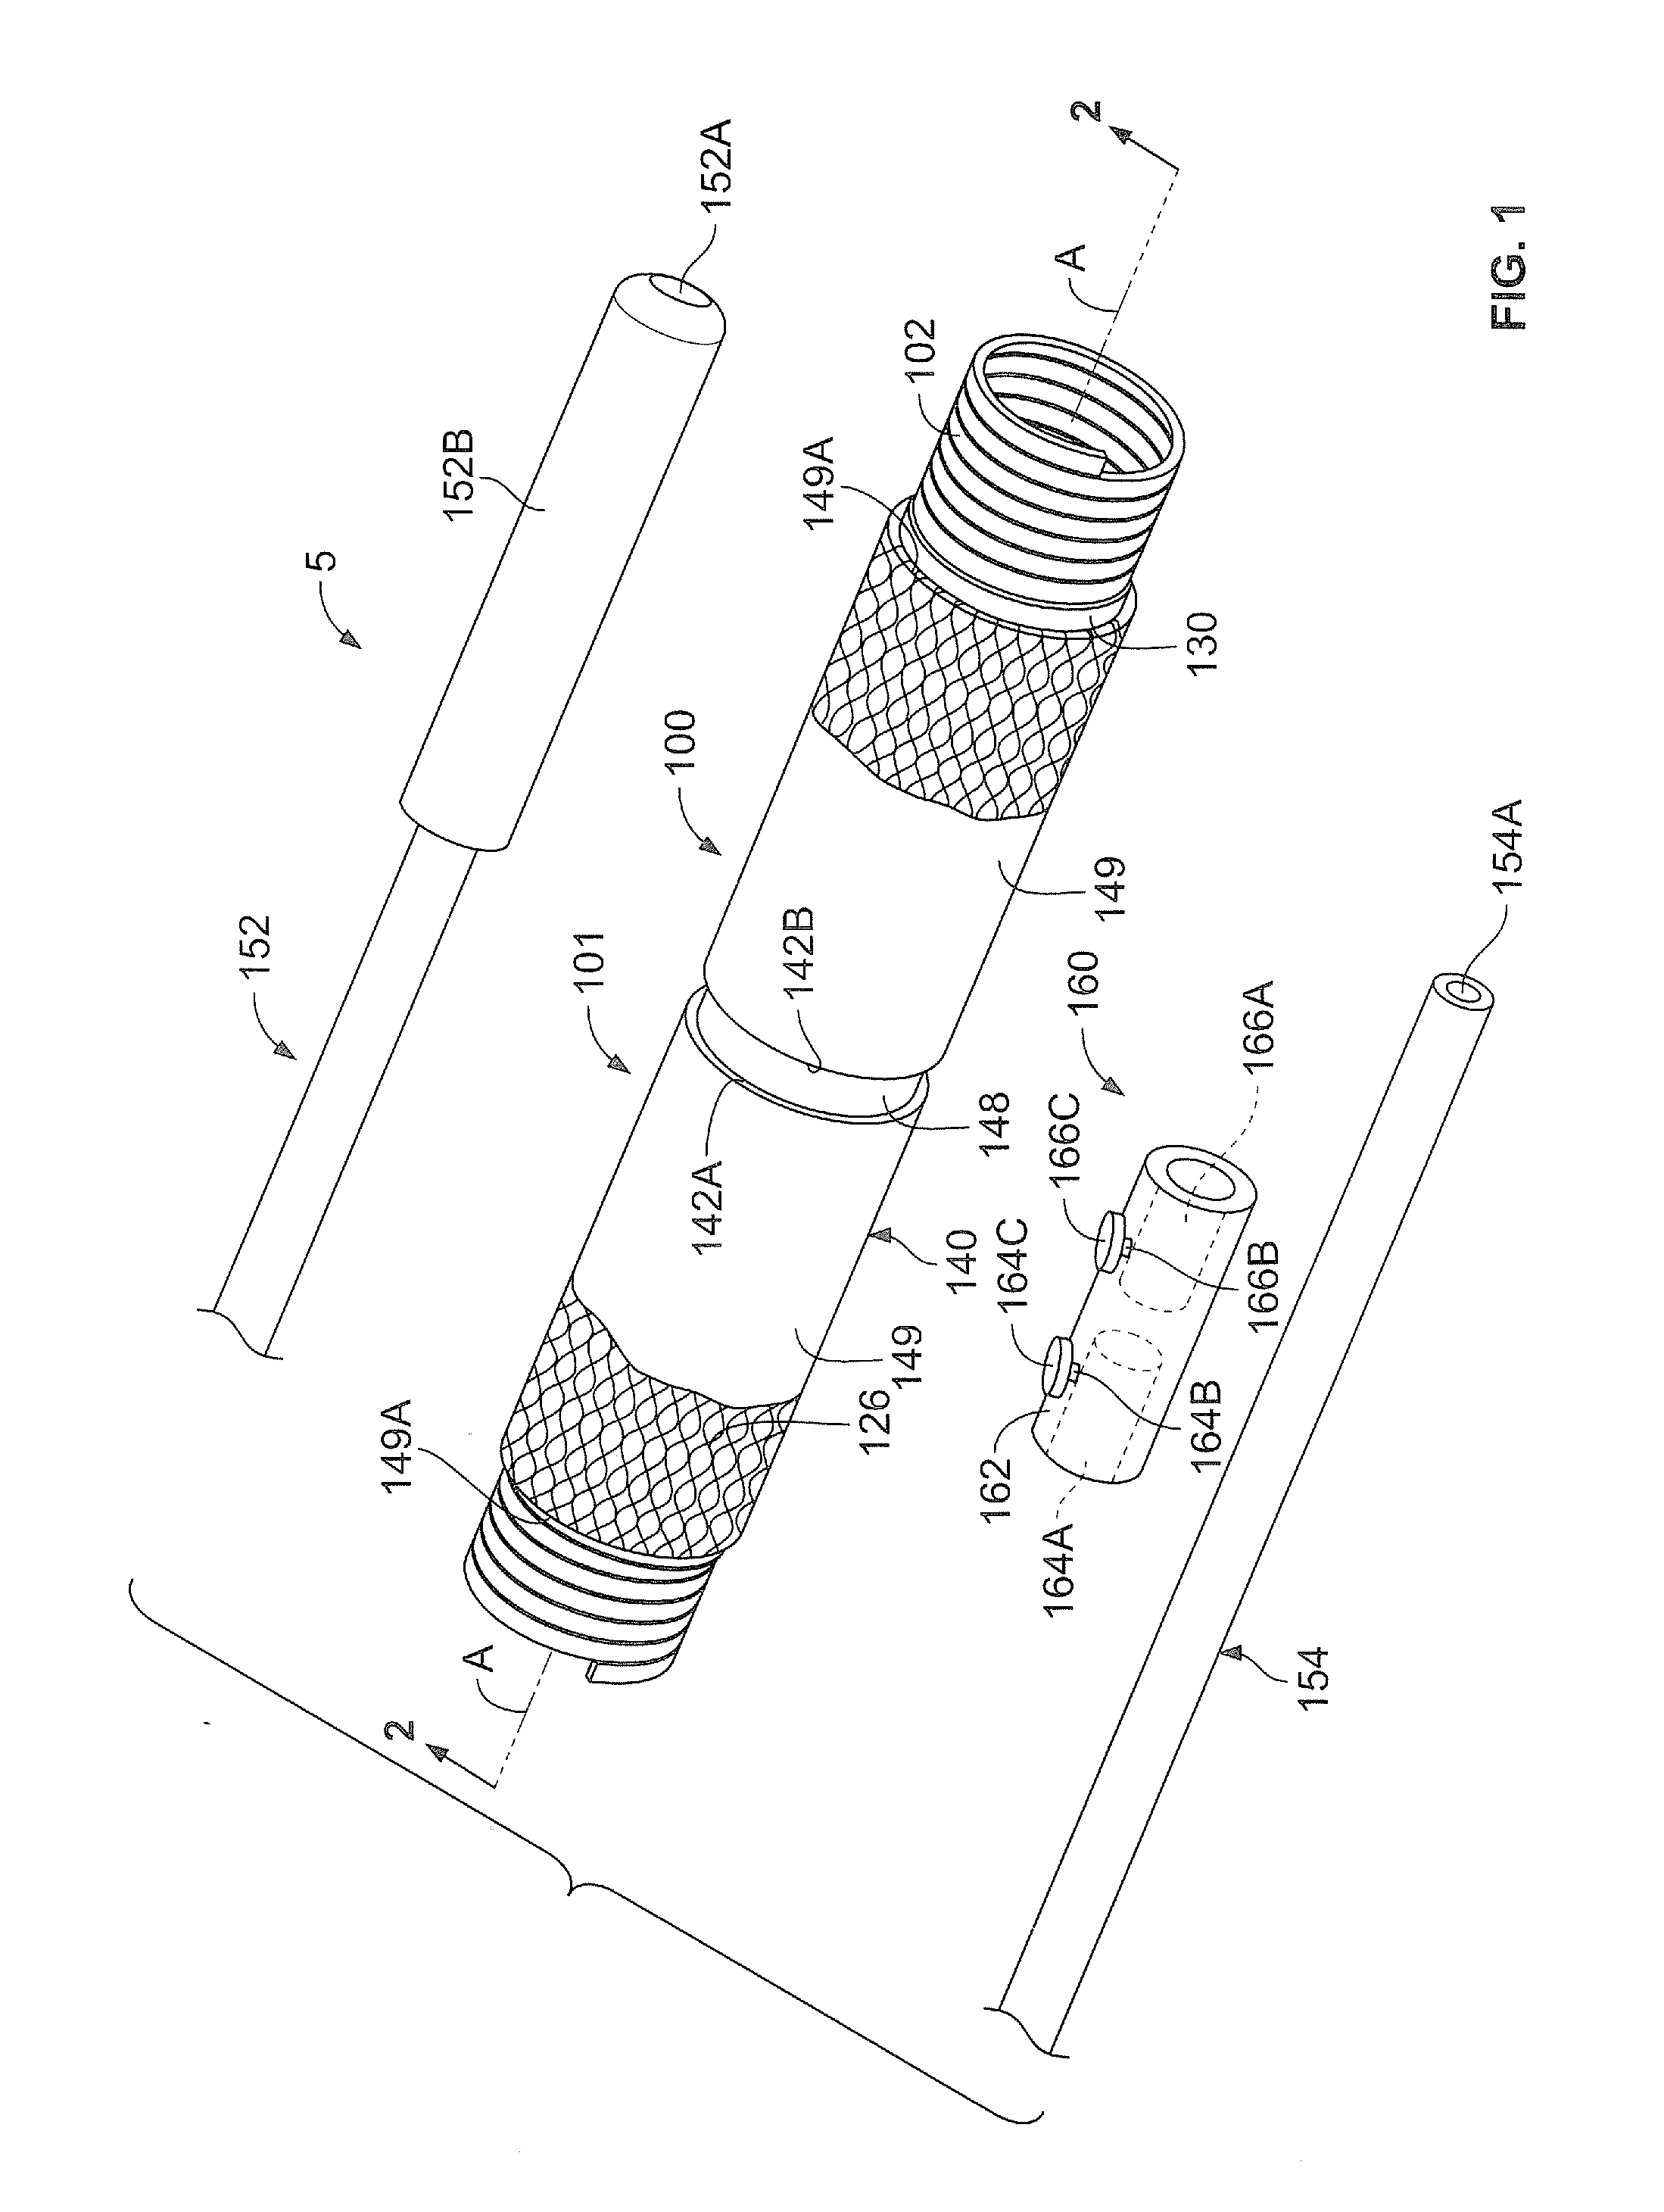 Methods and kits for covering electrical cables and connections